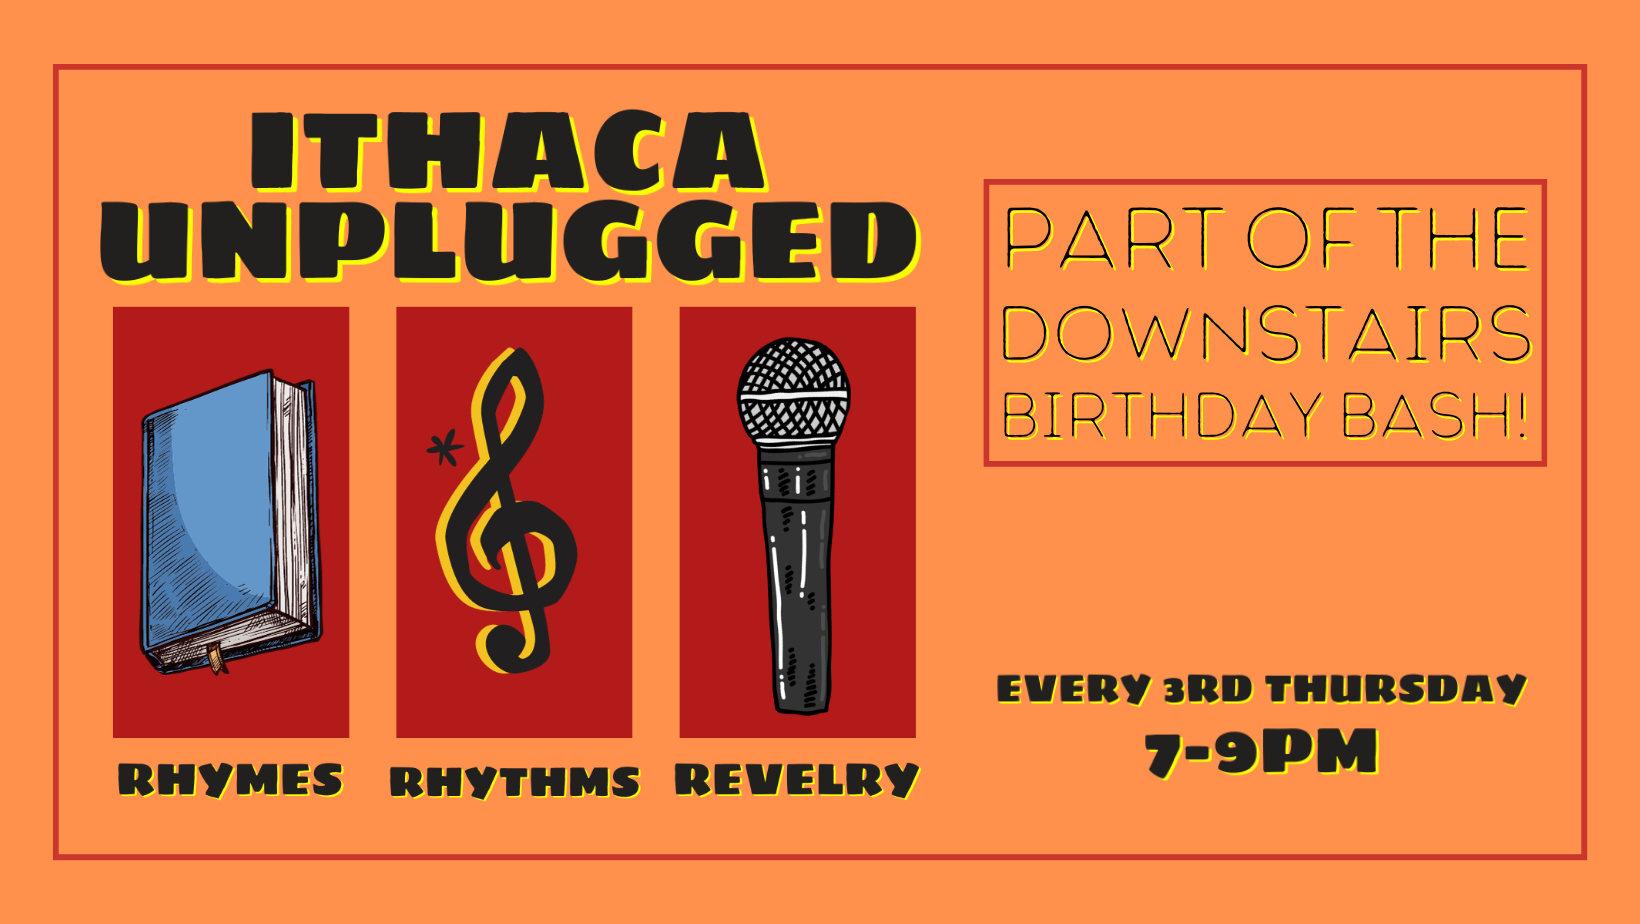 Ithaca Unplugged: Rhymes, Rhythms, and Revelry @ The Downstairs Birthday Bash